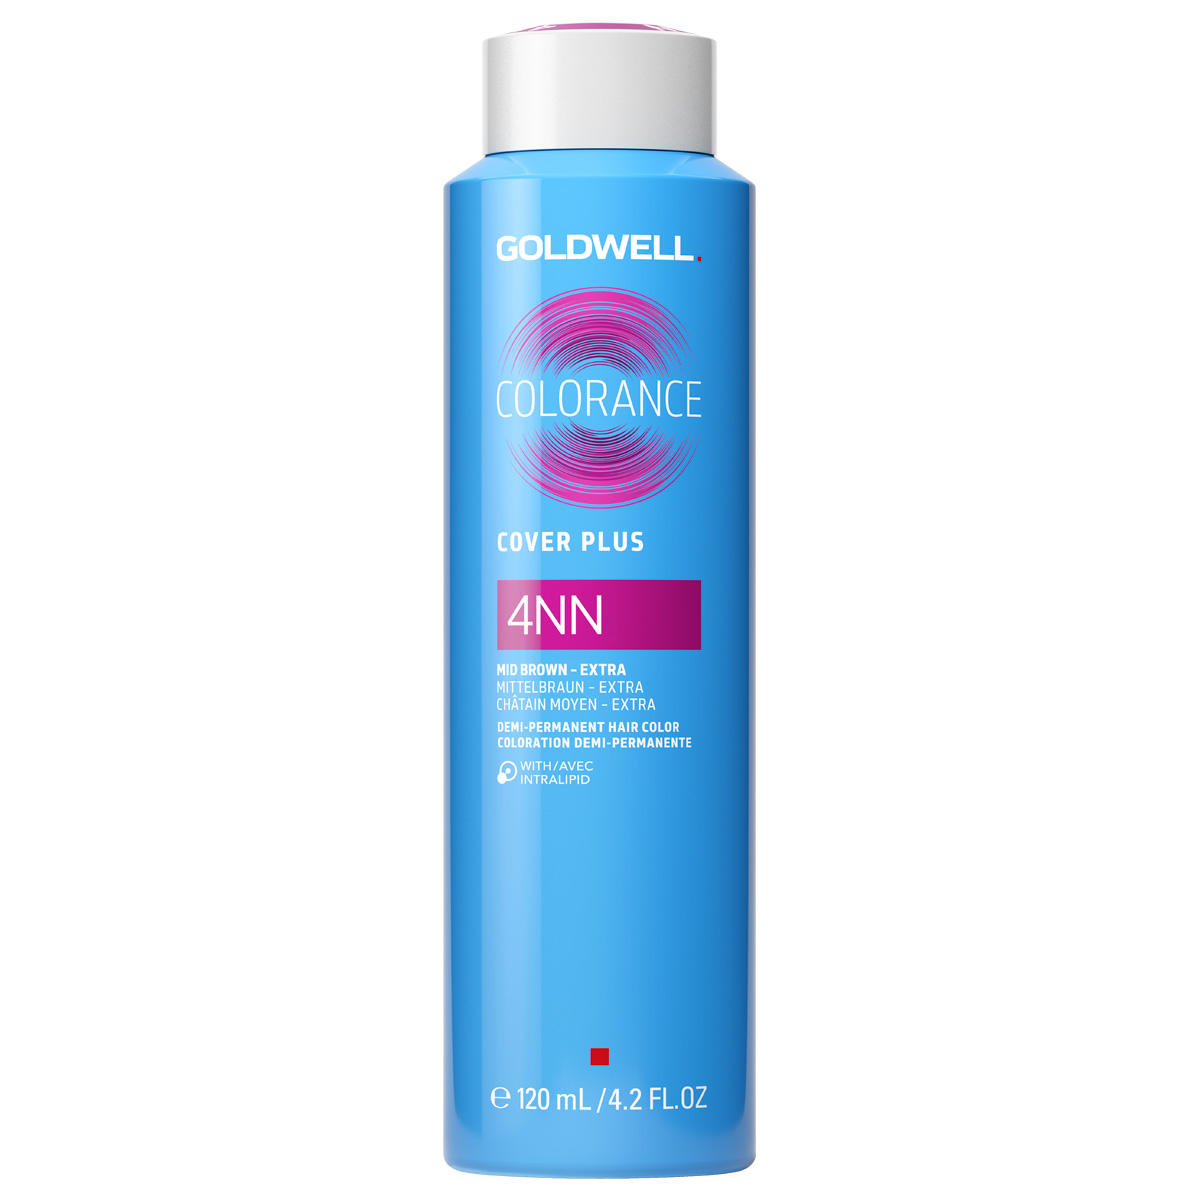 Goldwell Colorance Cover Plus Demi-Permanent Hair Color 4NN Mittelbraun Extra 120 ml